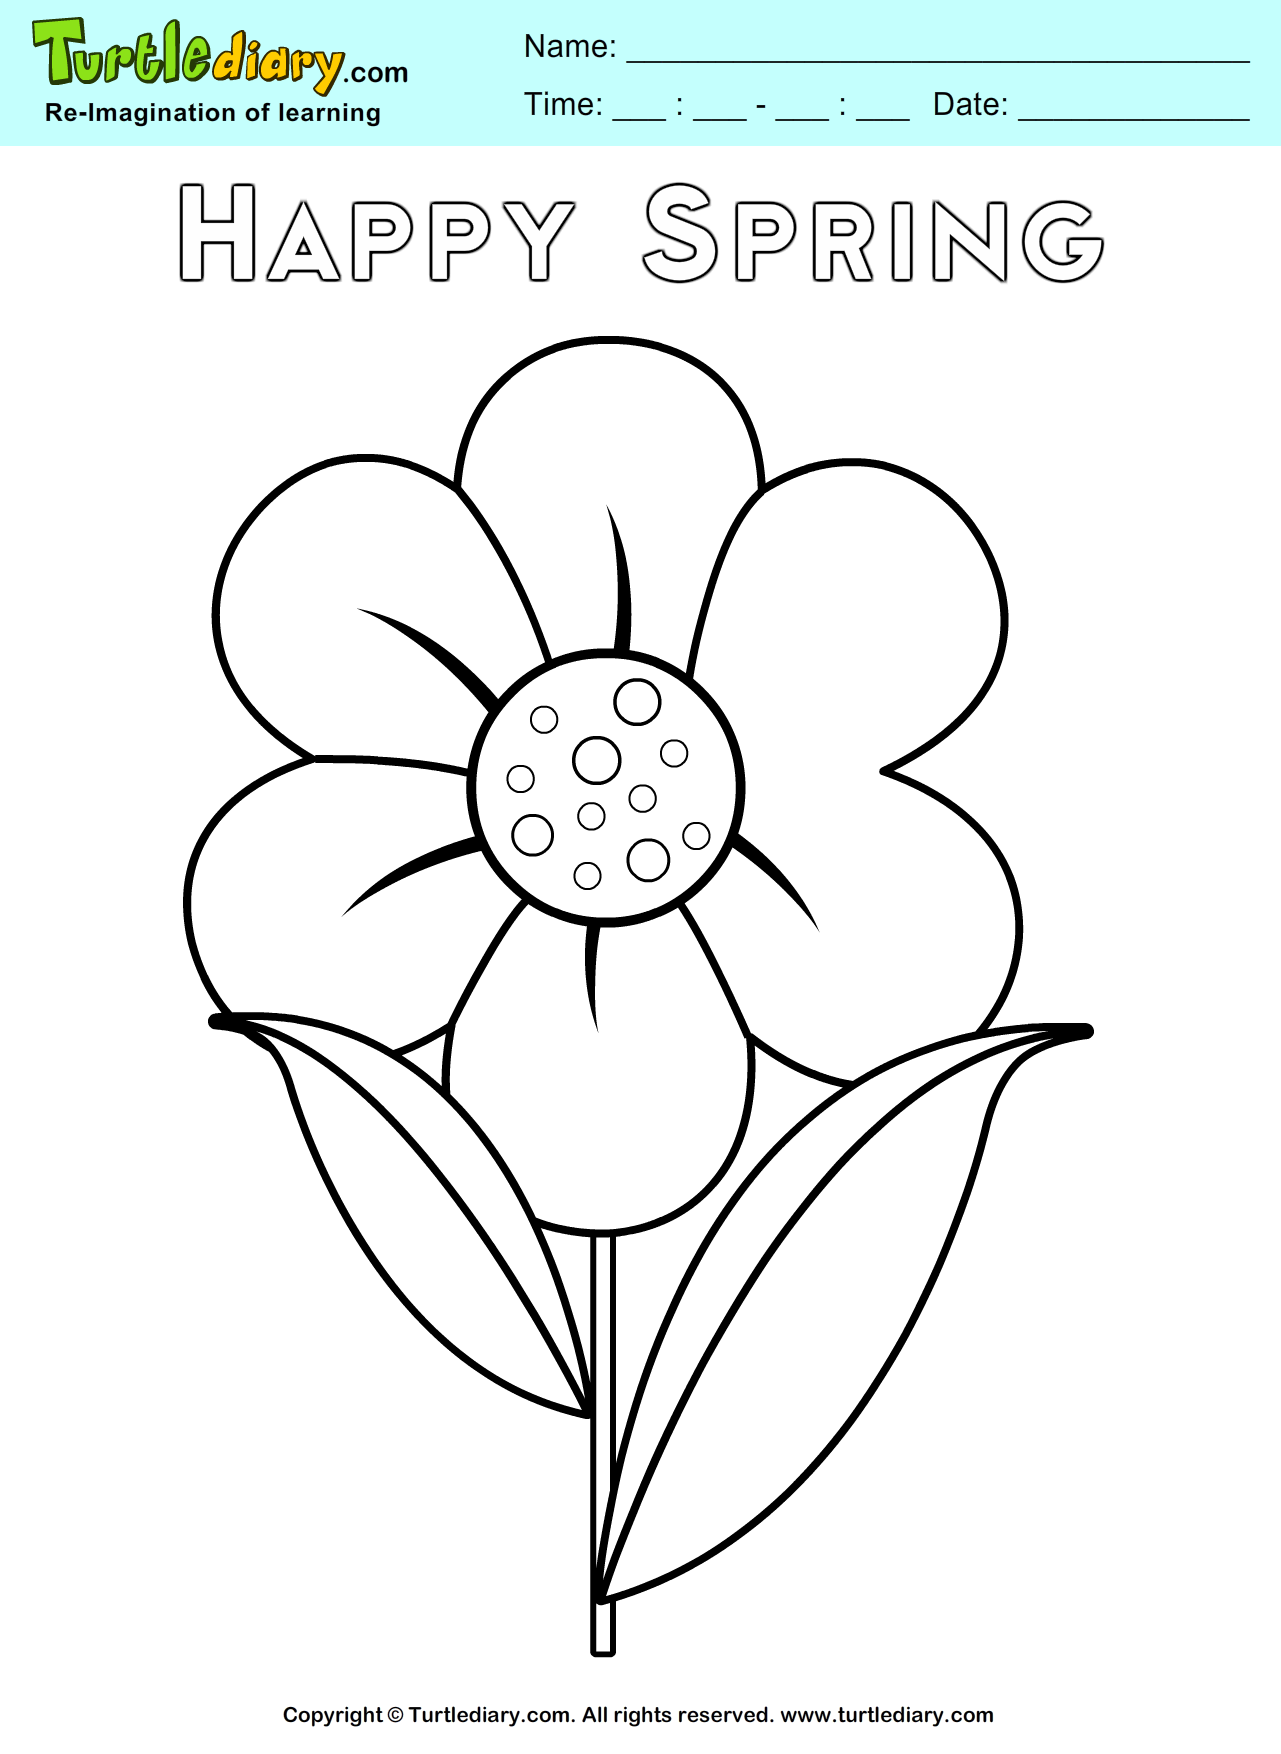 Spring flower coloring page turtle diary